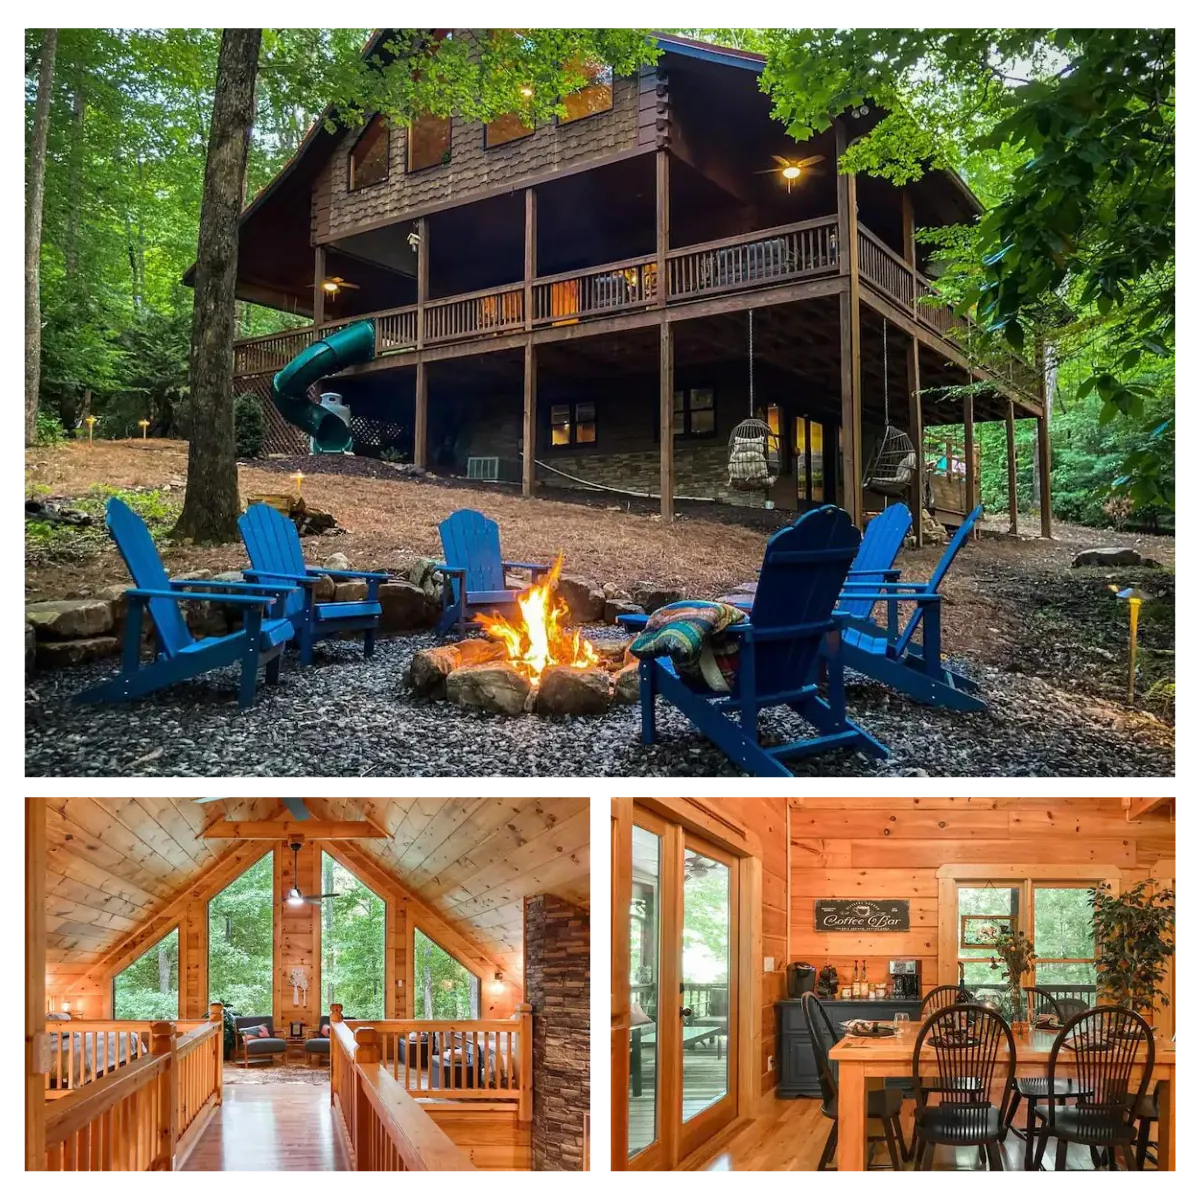 Discover a serene retreat at Blissful Getaway, surrounded by the scenic Blue Ridge Mountains. Experience the changing seasons with lush greenery in summer and vibrant hues of red, orange, and yellow in fall, while enjoying the calming melodies of nature and twinkling fireflies at night.